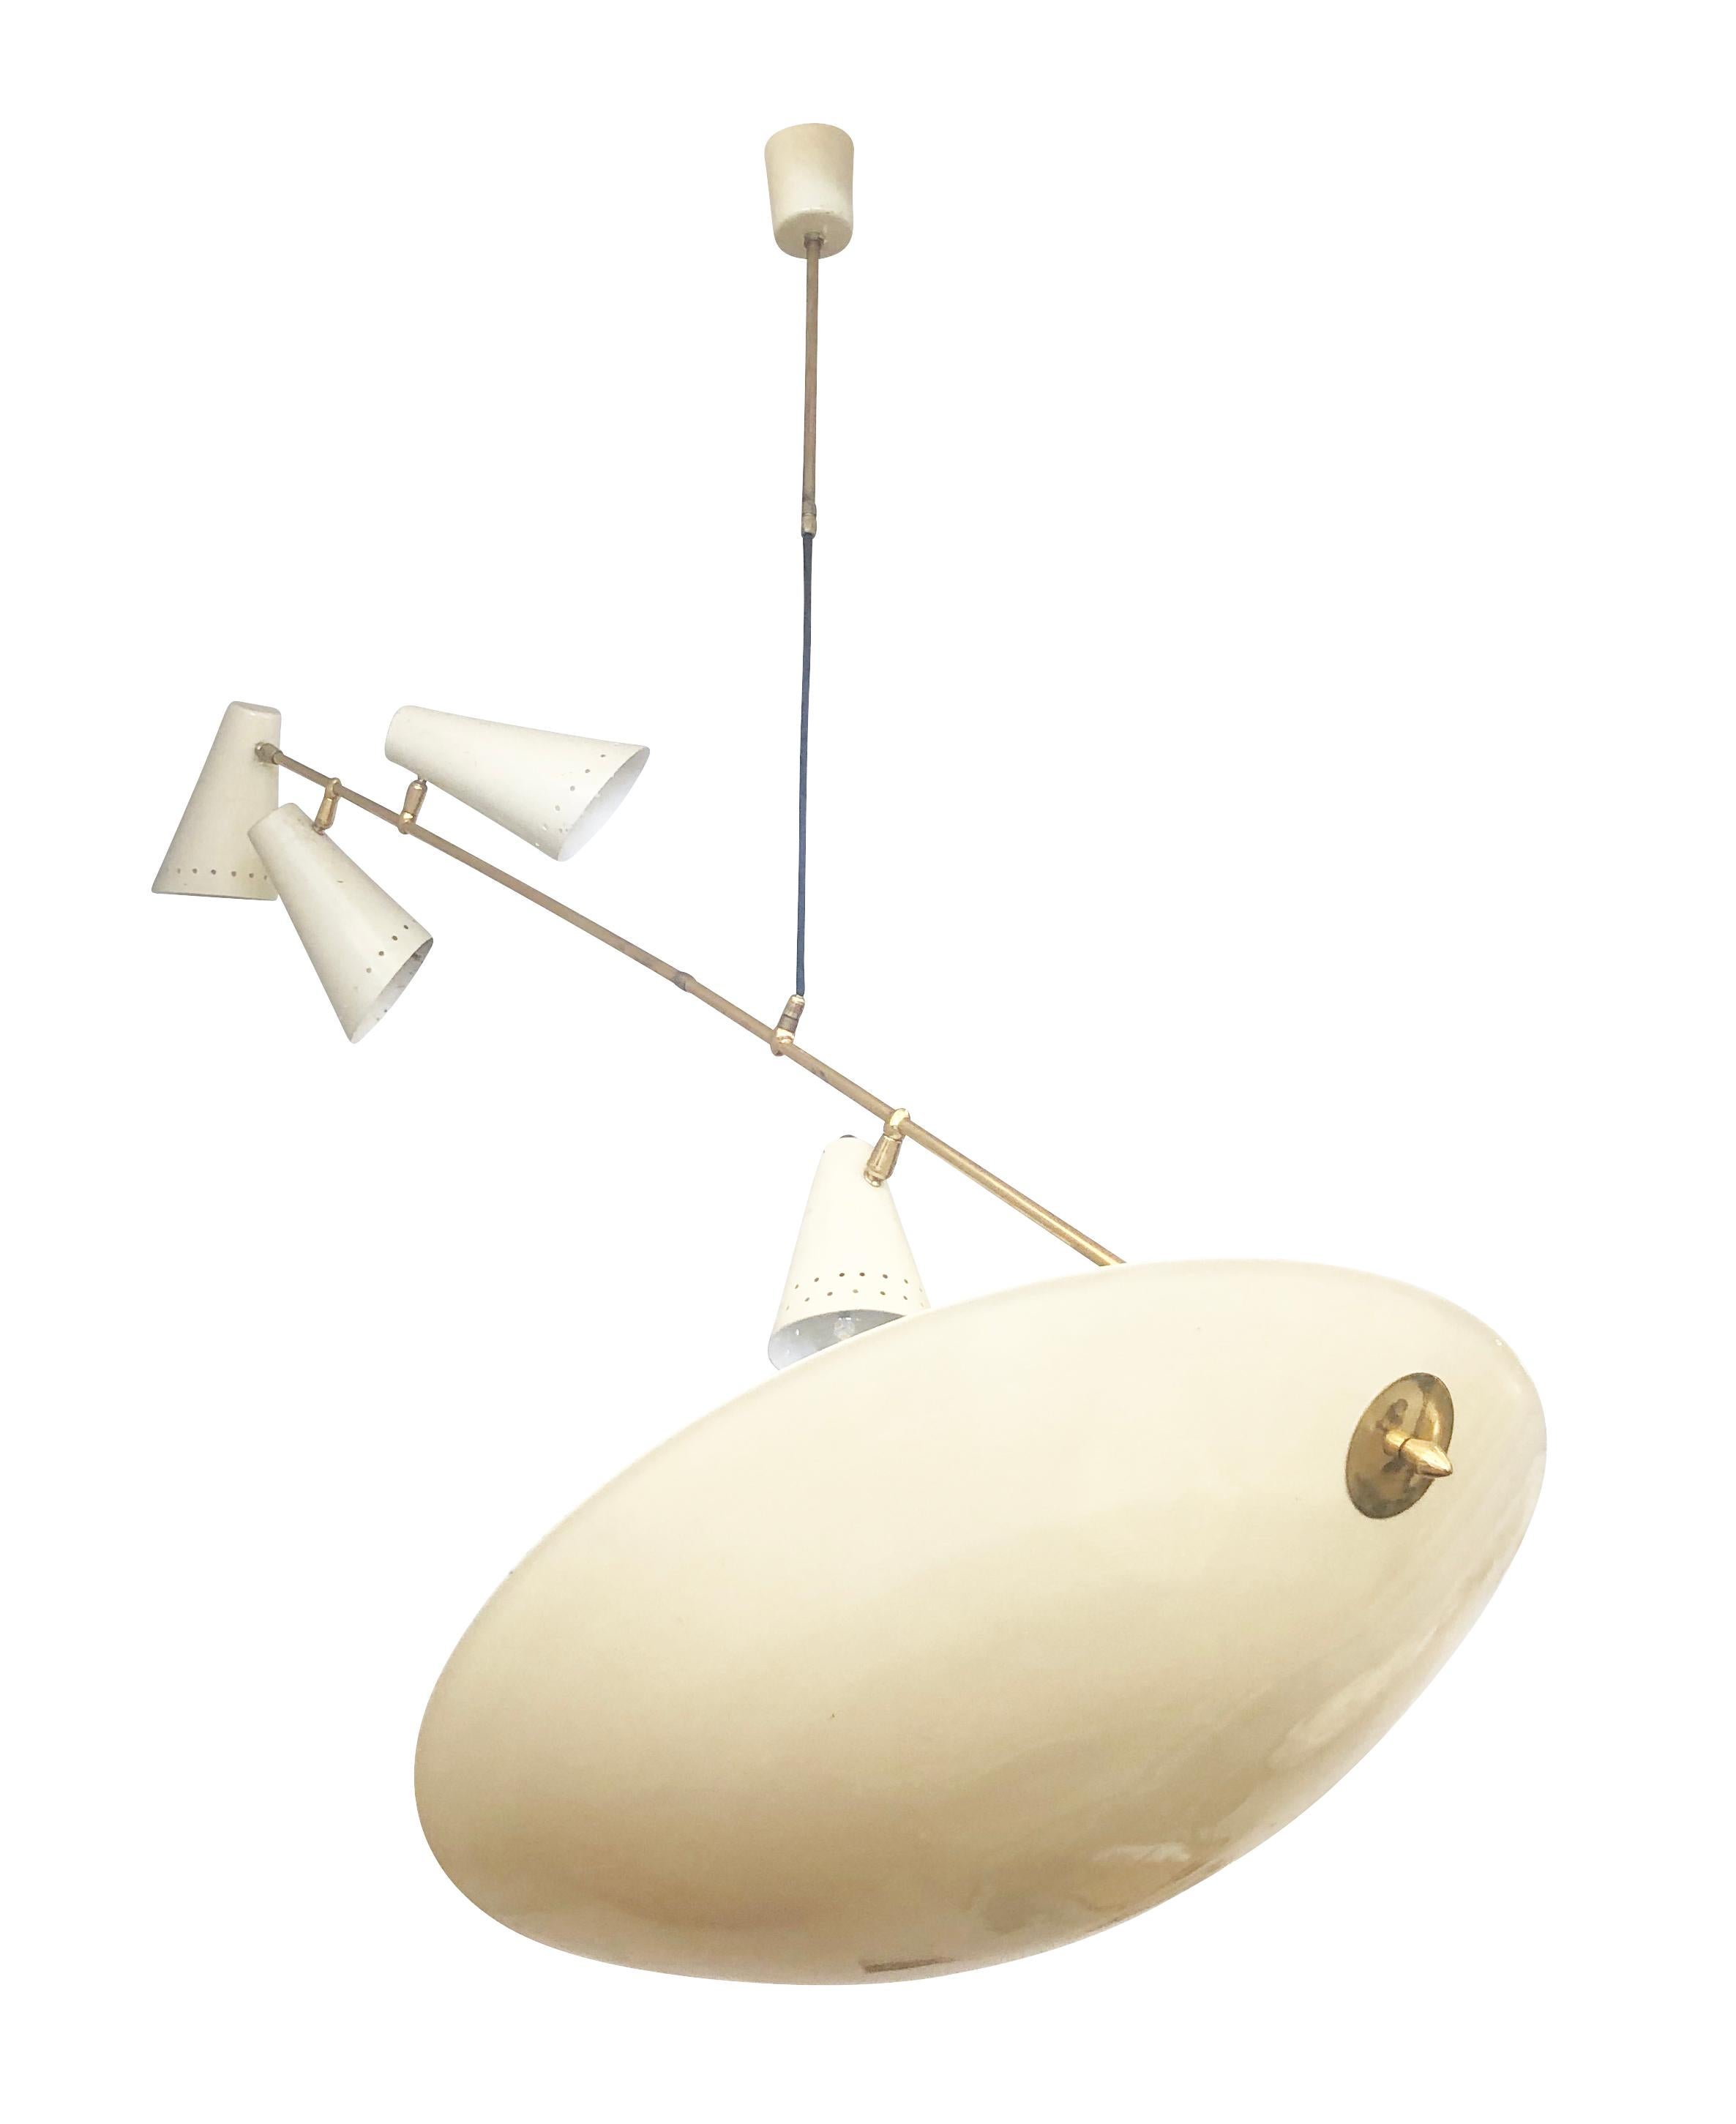 Rare ceiling light by G.M.C.E with five articulating shades mounted on a diagonal stem. Beige lacquered aluminium and brass construction. Holds 4 candelabra sockets in the smaller conical shades. Height can be easily changed by adjusting the fabric